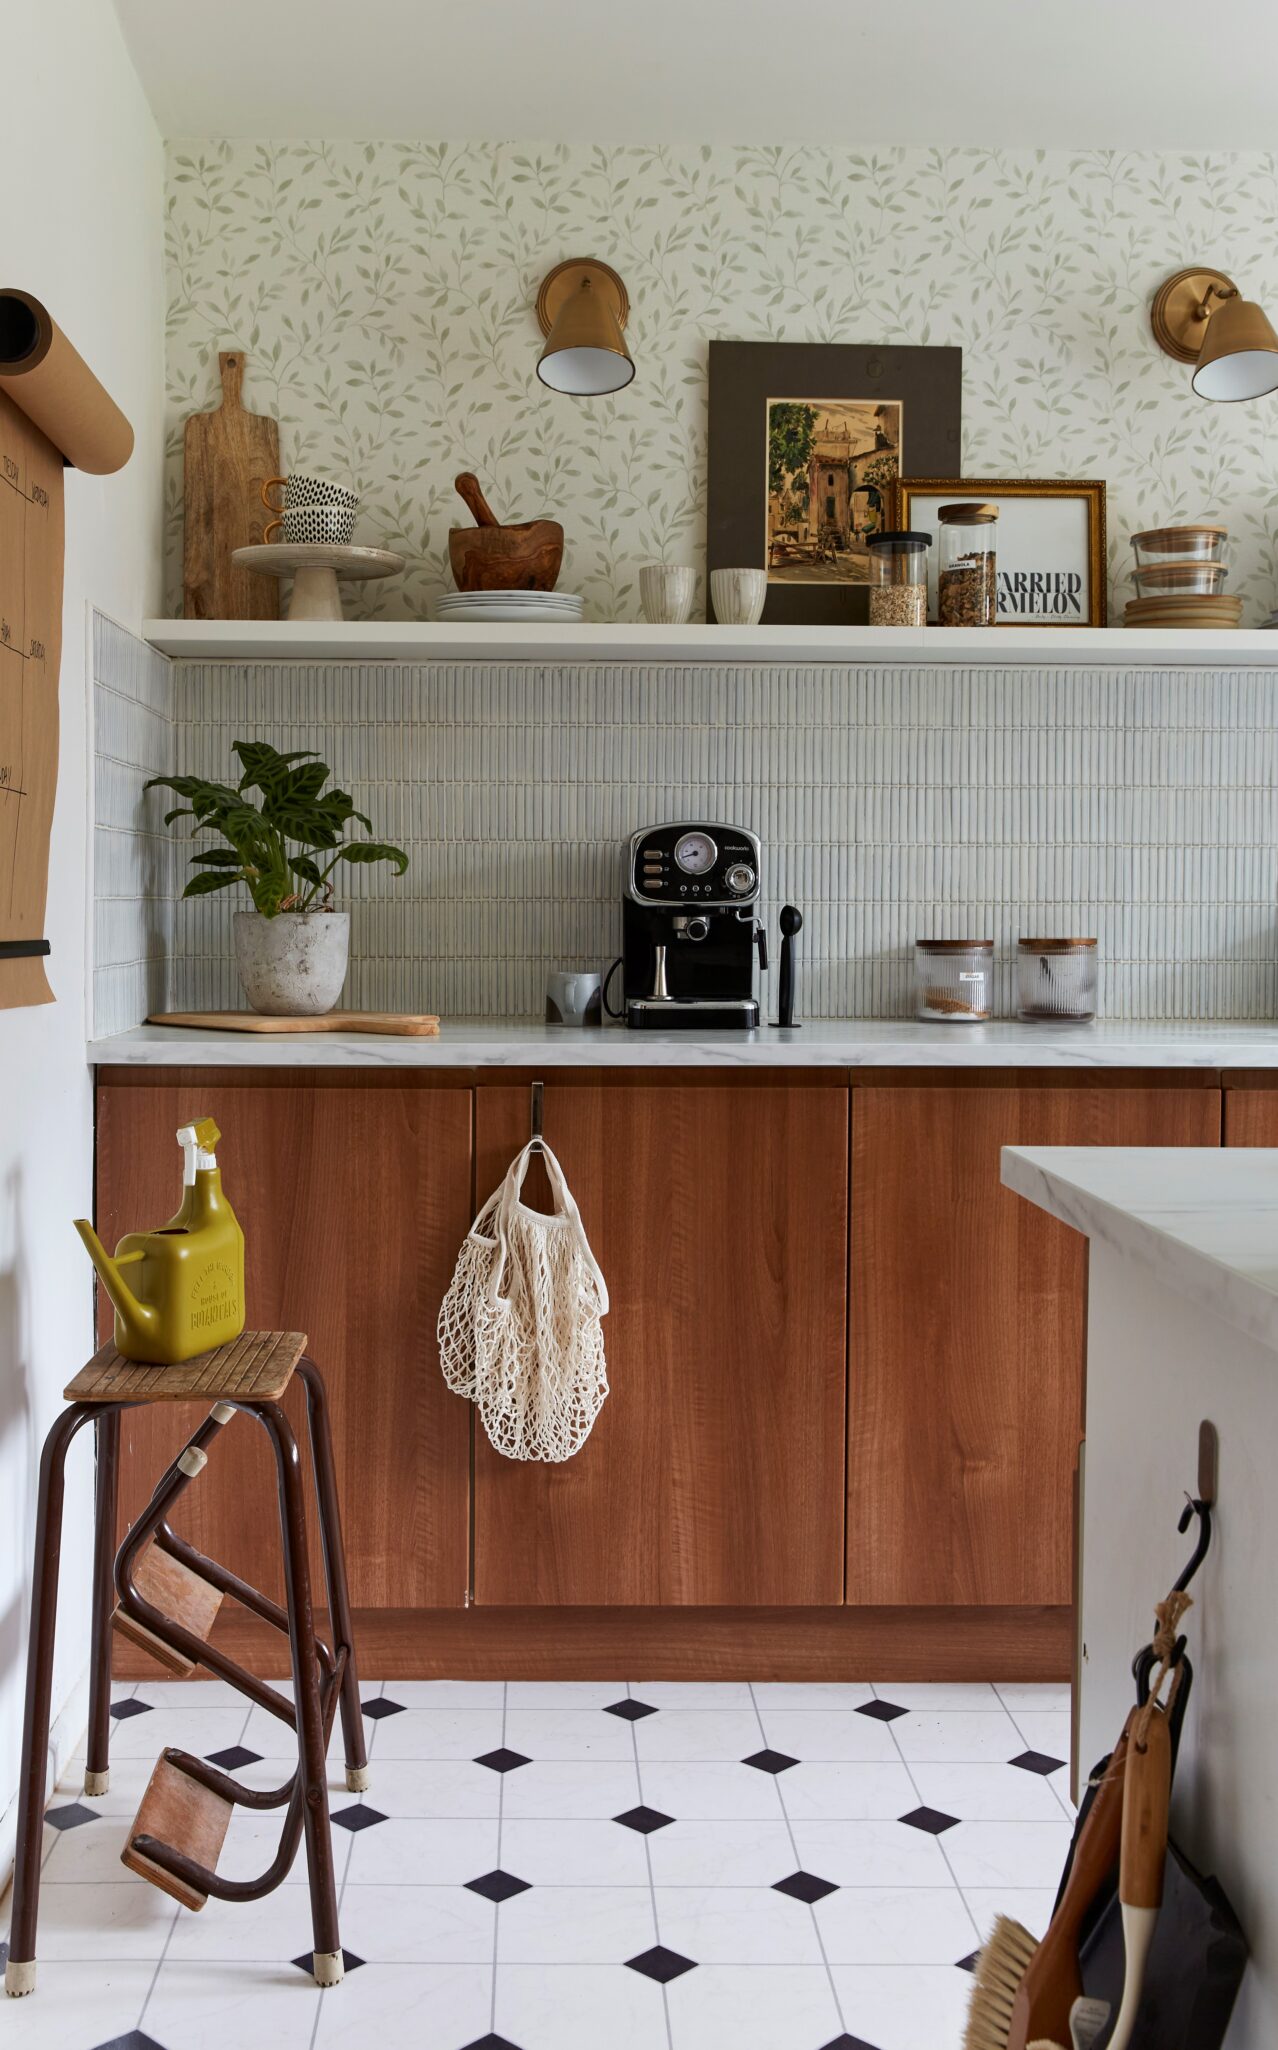 Open shelving above base cabinets with wall paper above the shelf and tile backsplash below and sconces above the shelf.